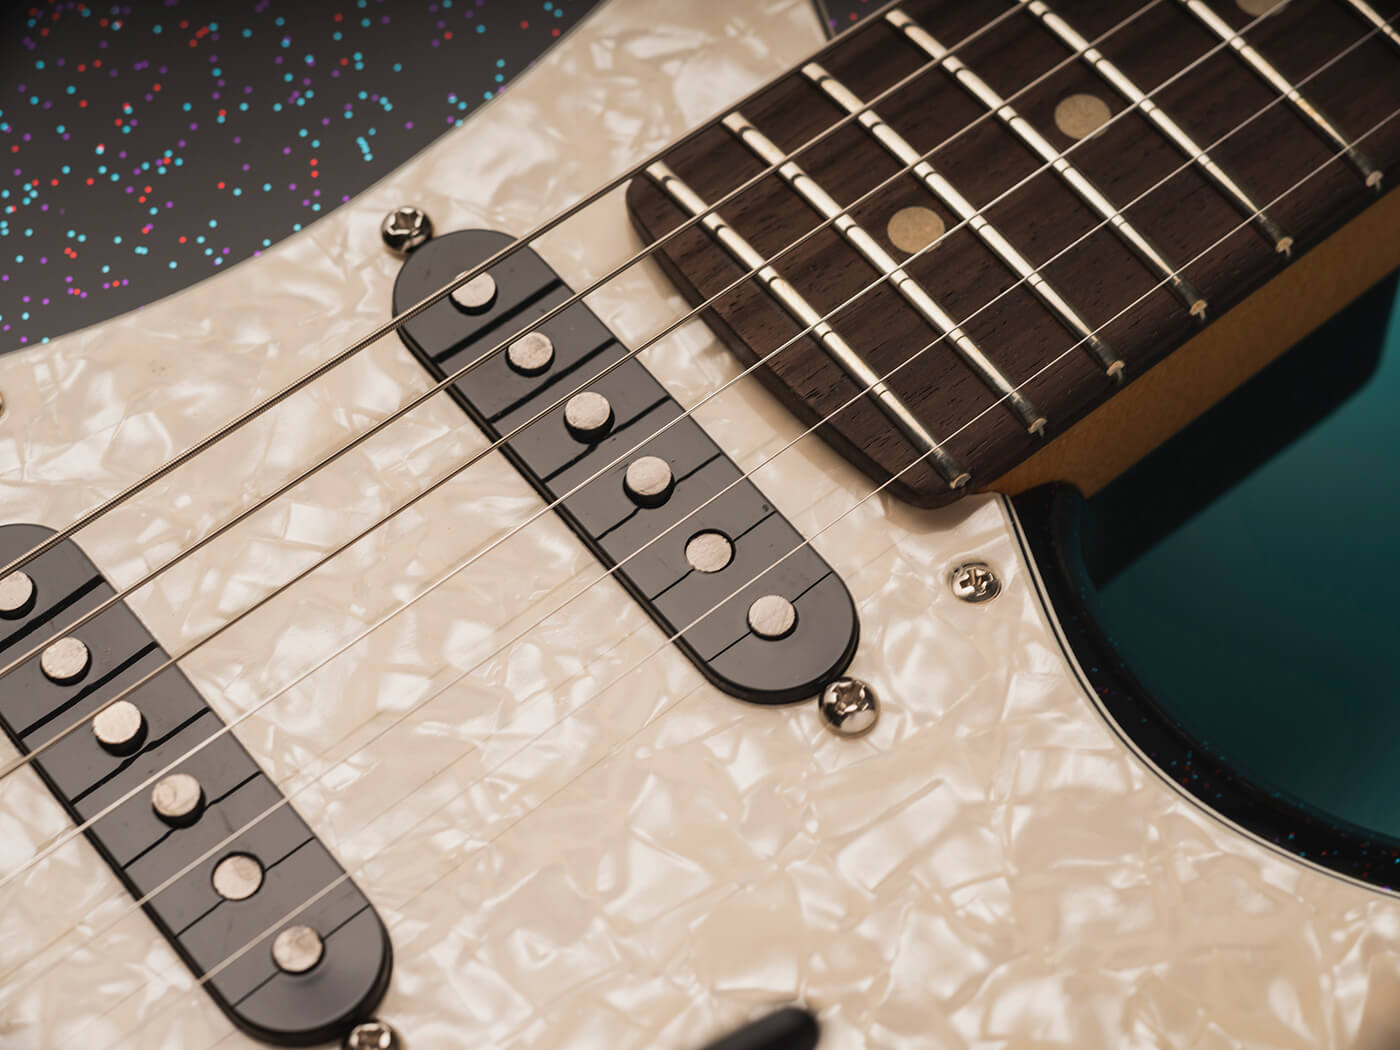 70th Anniversary Player Stratocaster neck and middle pickups, photo by Adam Gasson